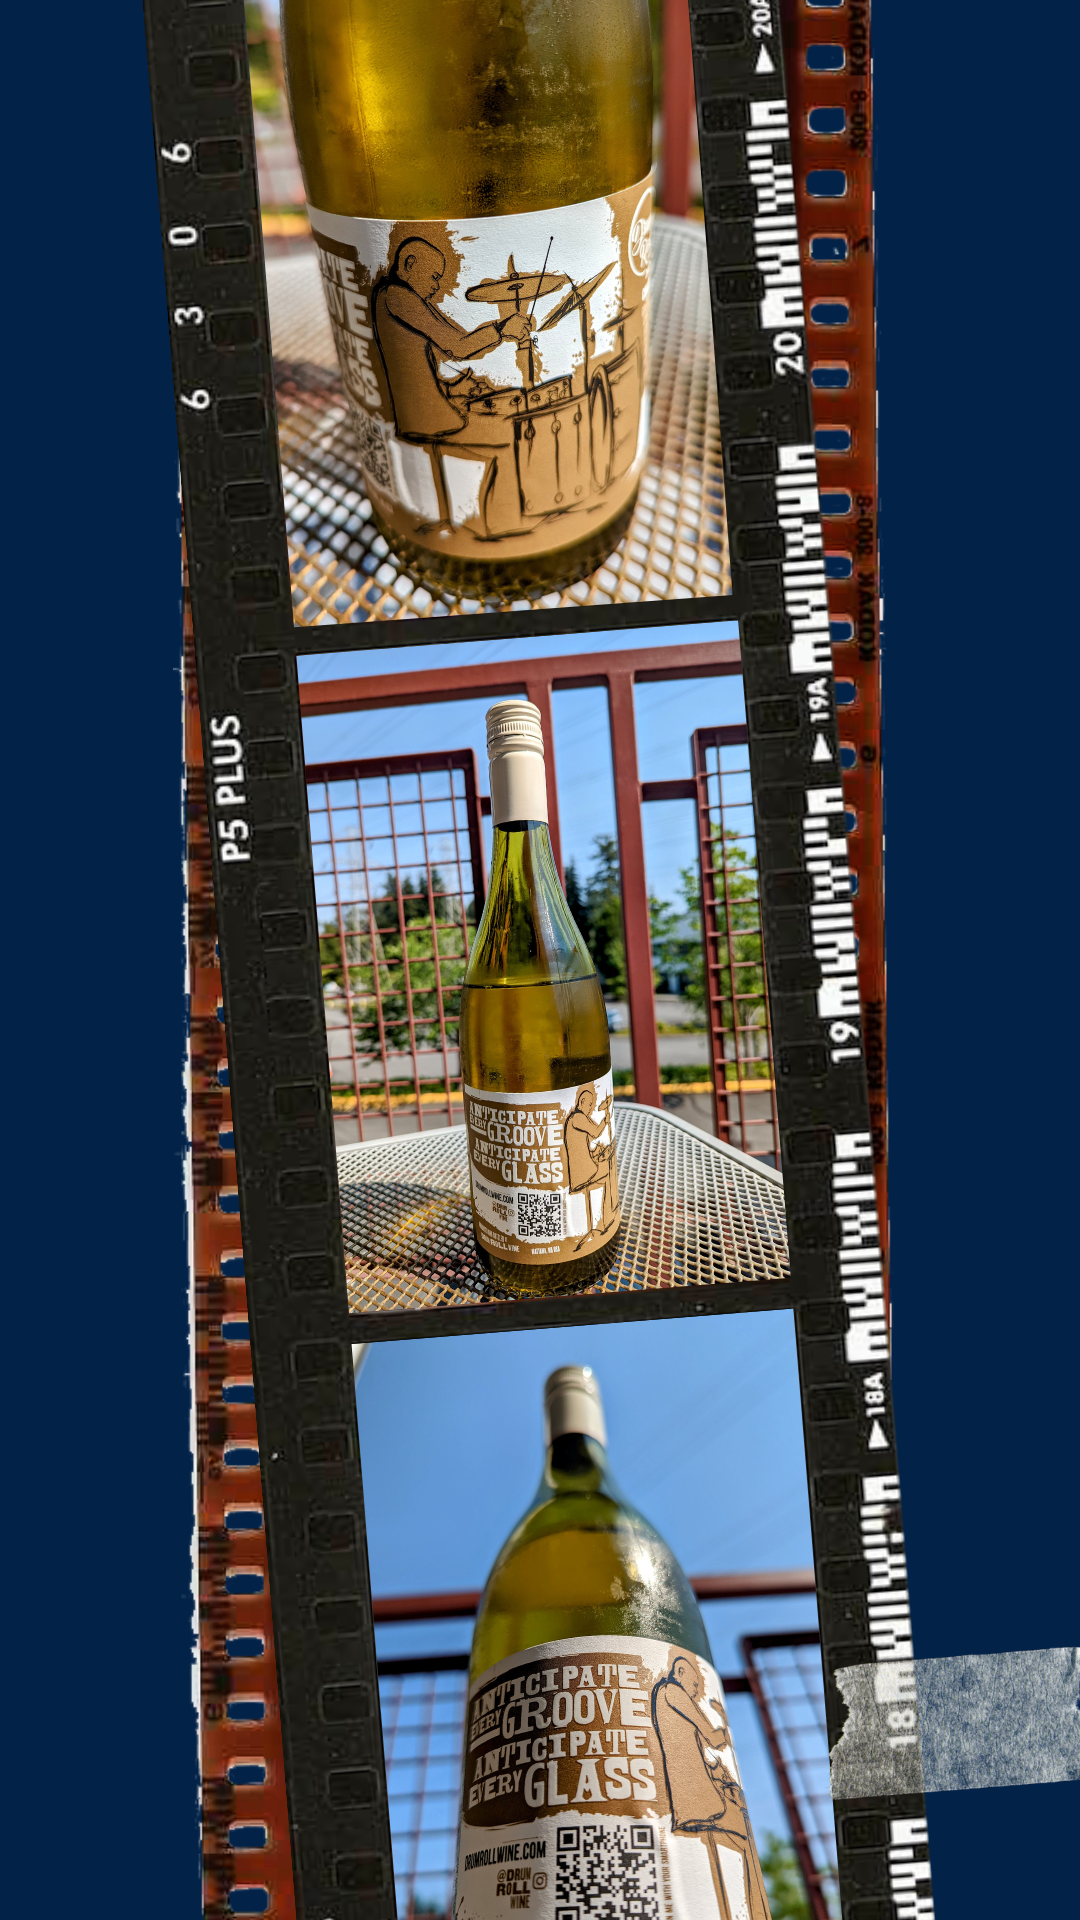 Drum Roll Wine White reviewed by Windermere Mill Creek